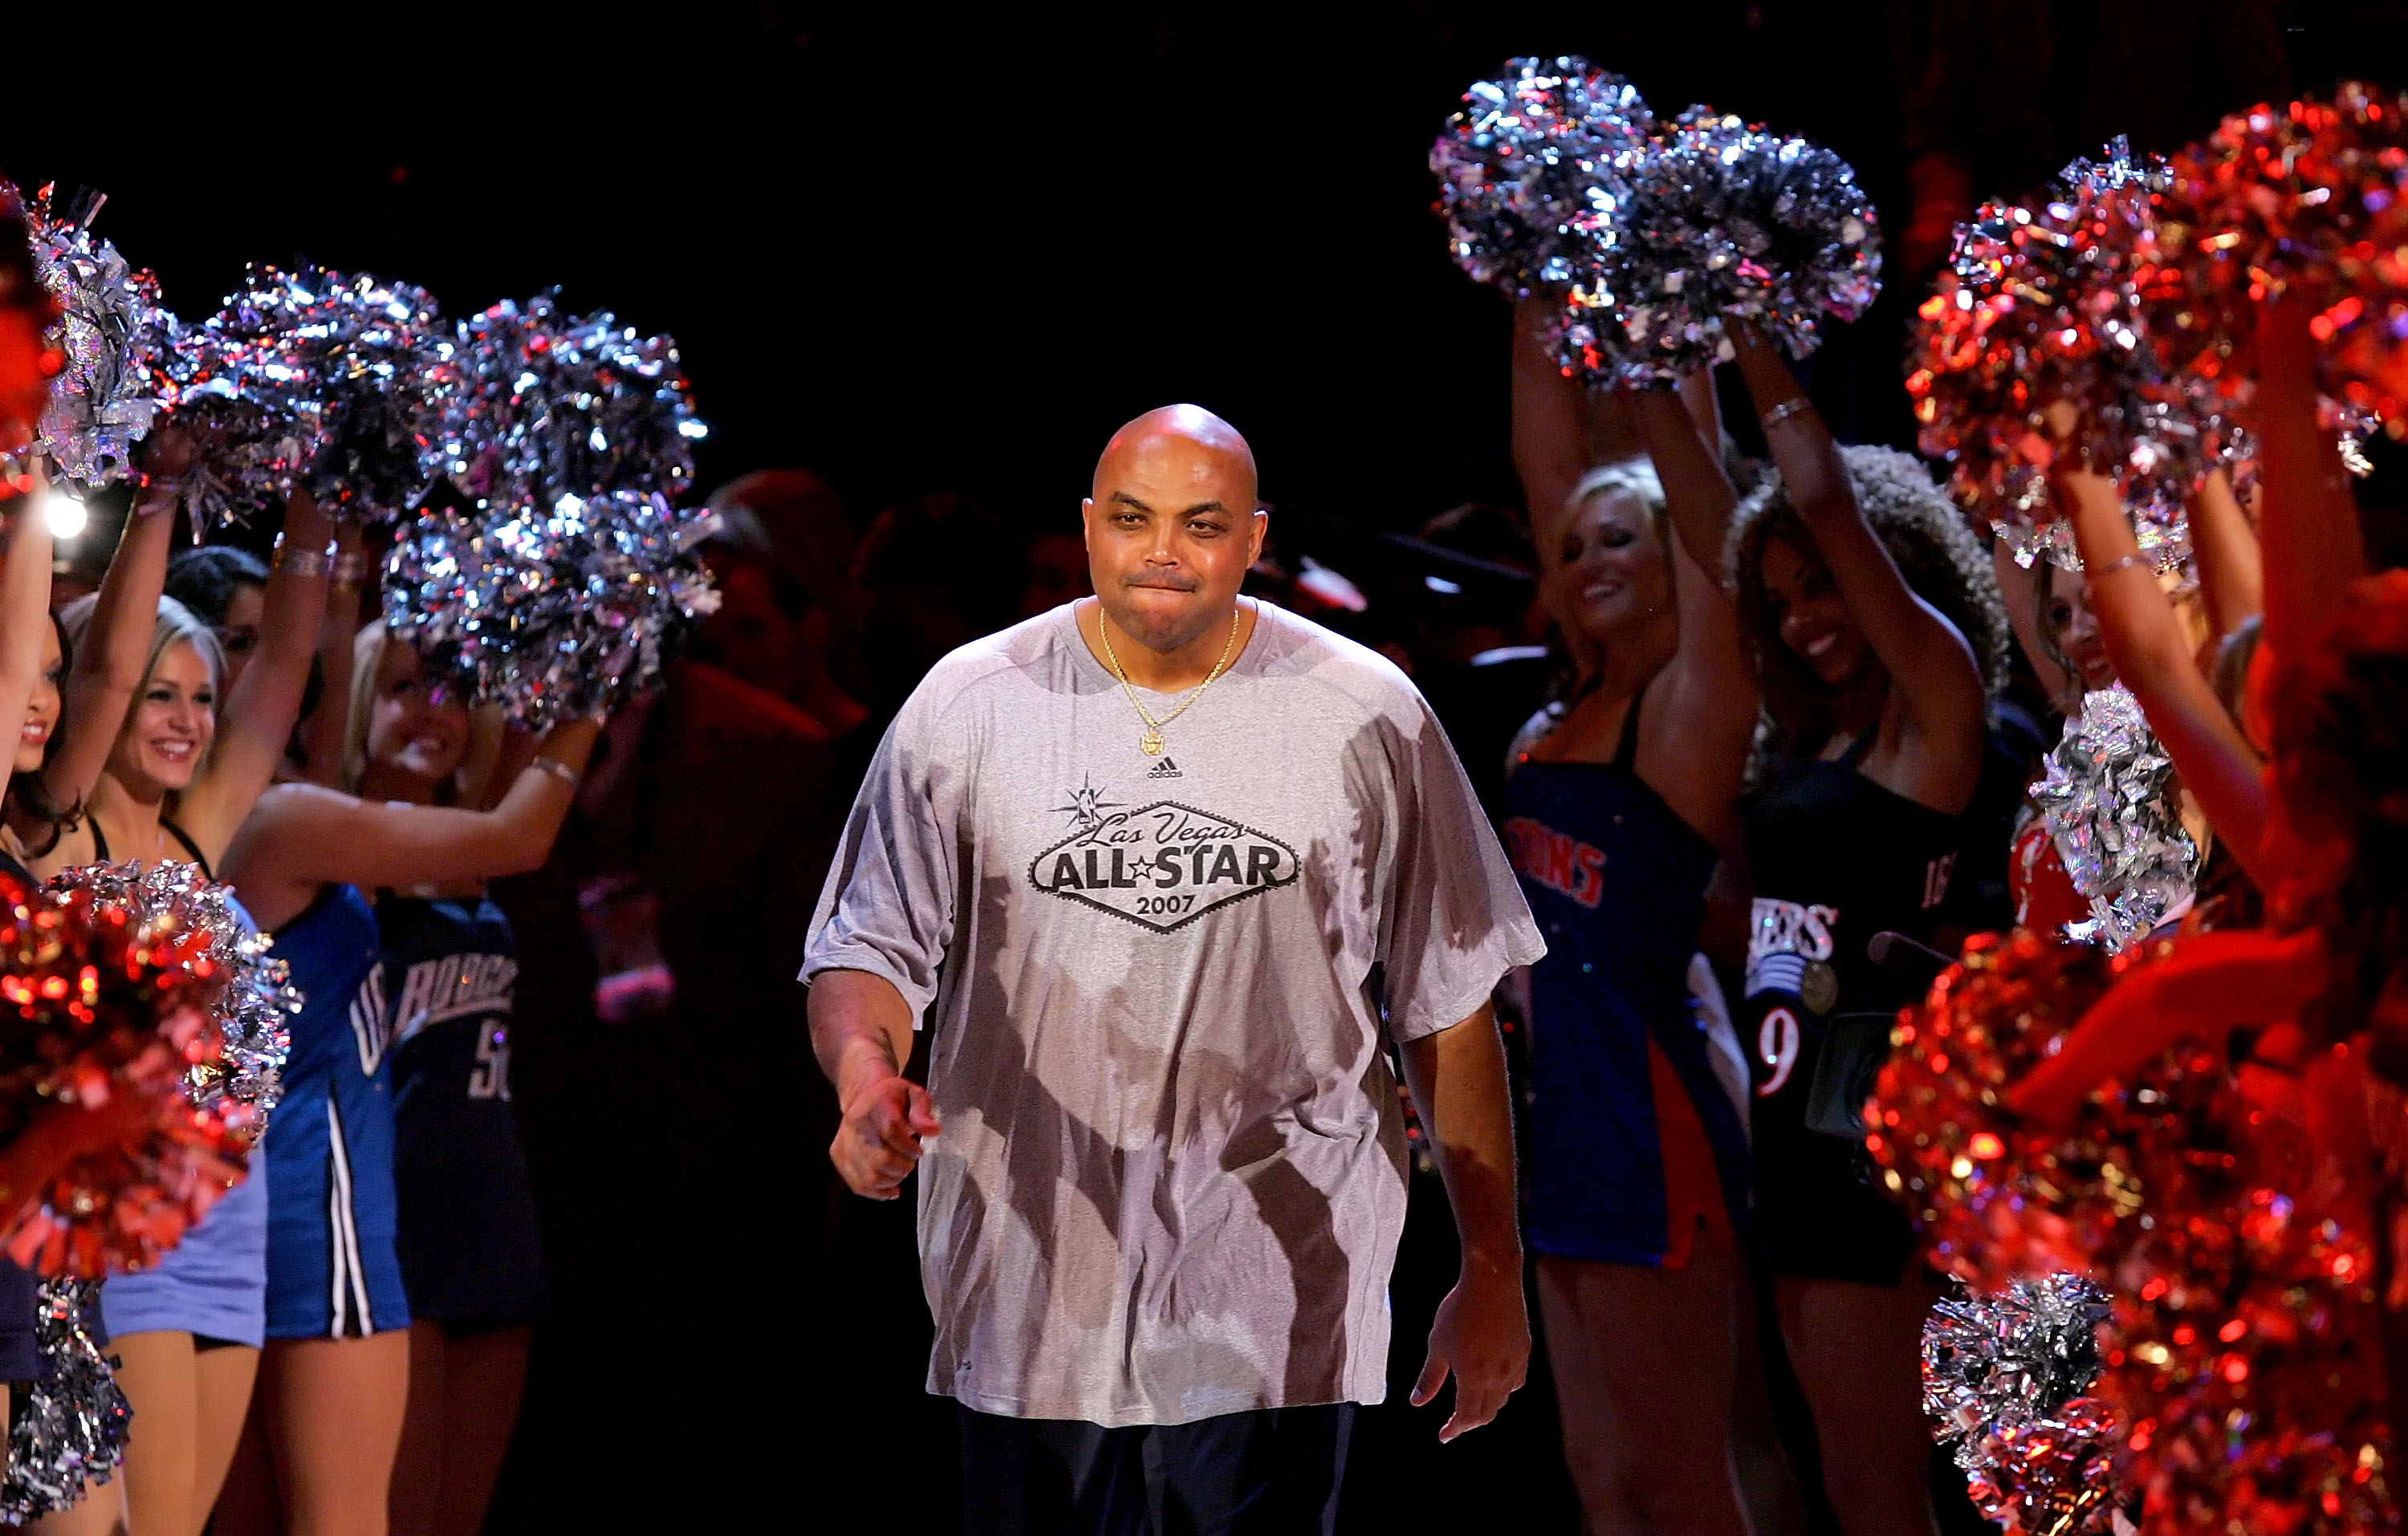 LAS VEGAS - FEBRUARY 17:  NBA legend Charles Barkley is introduced before the start of the Bavetta/Barkley Challenge during NBA All-Star Weekend on February 17, 2007 at Thomas & Mack Center in Las Vegas, Nevada.  NOTE TO USER: User expressly acknowledges